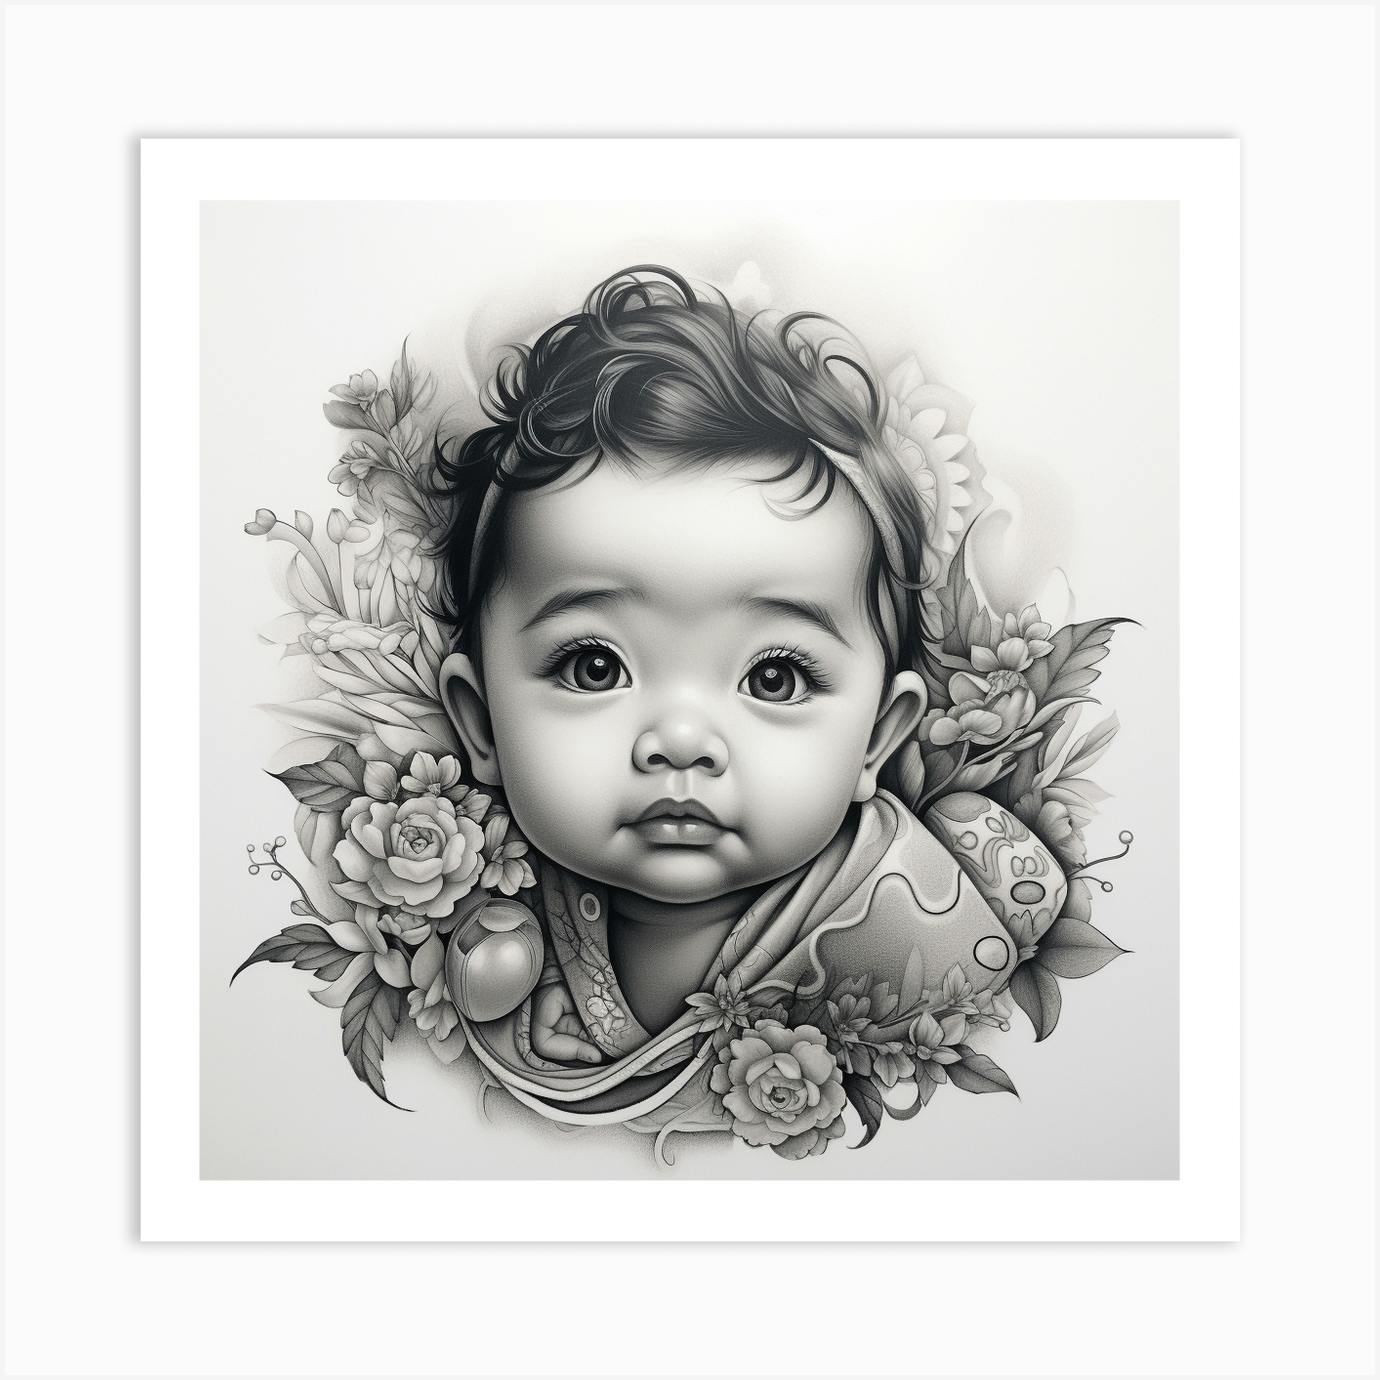 Baby smiles | Cute baby drawings, Baby sketch, Baby drawing